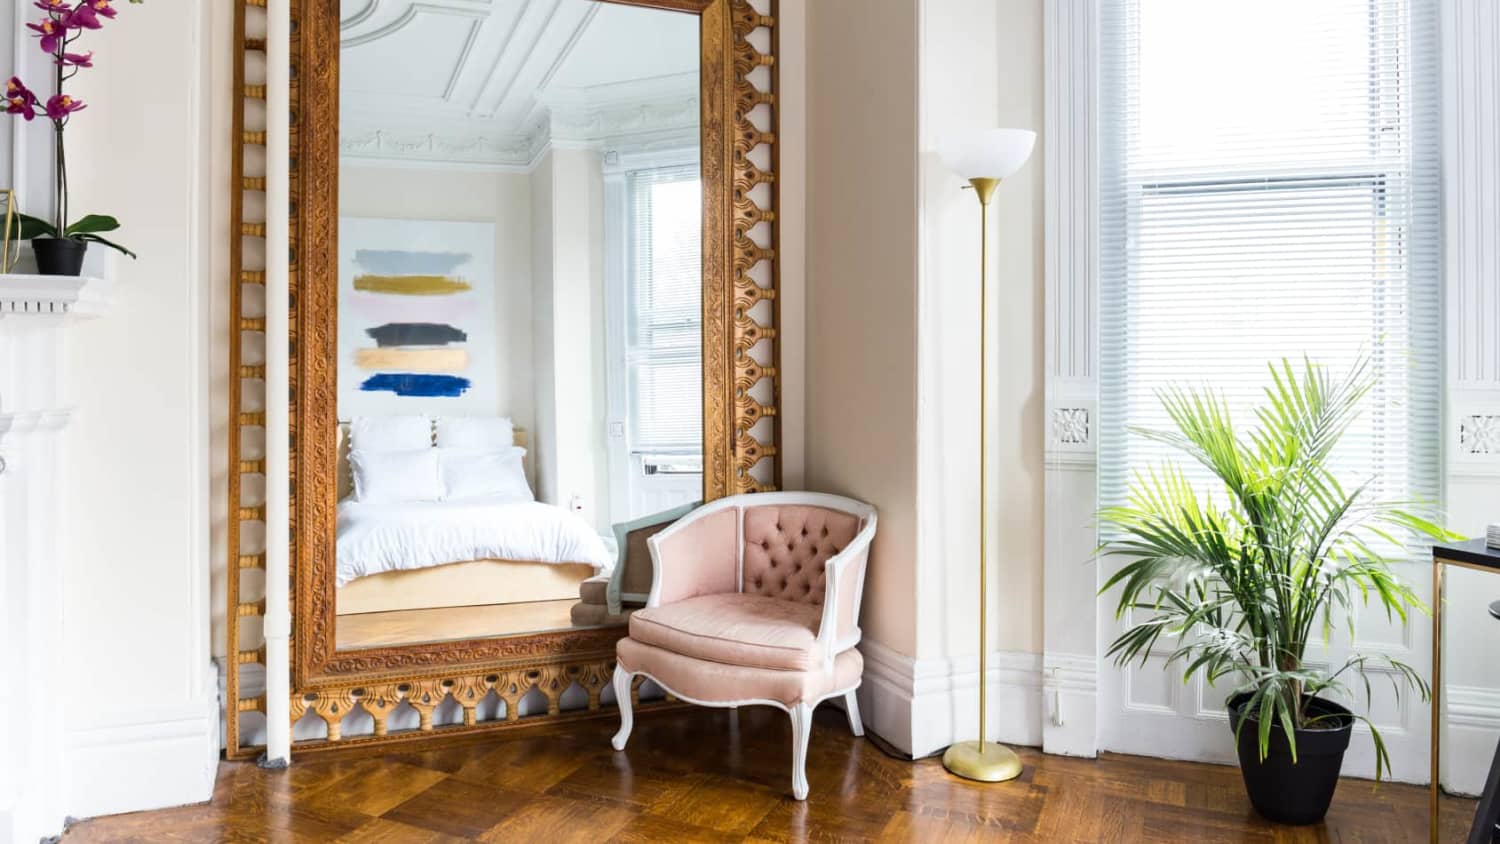 How to Use Mirrors to Make a Room Look Bigger and Brighter